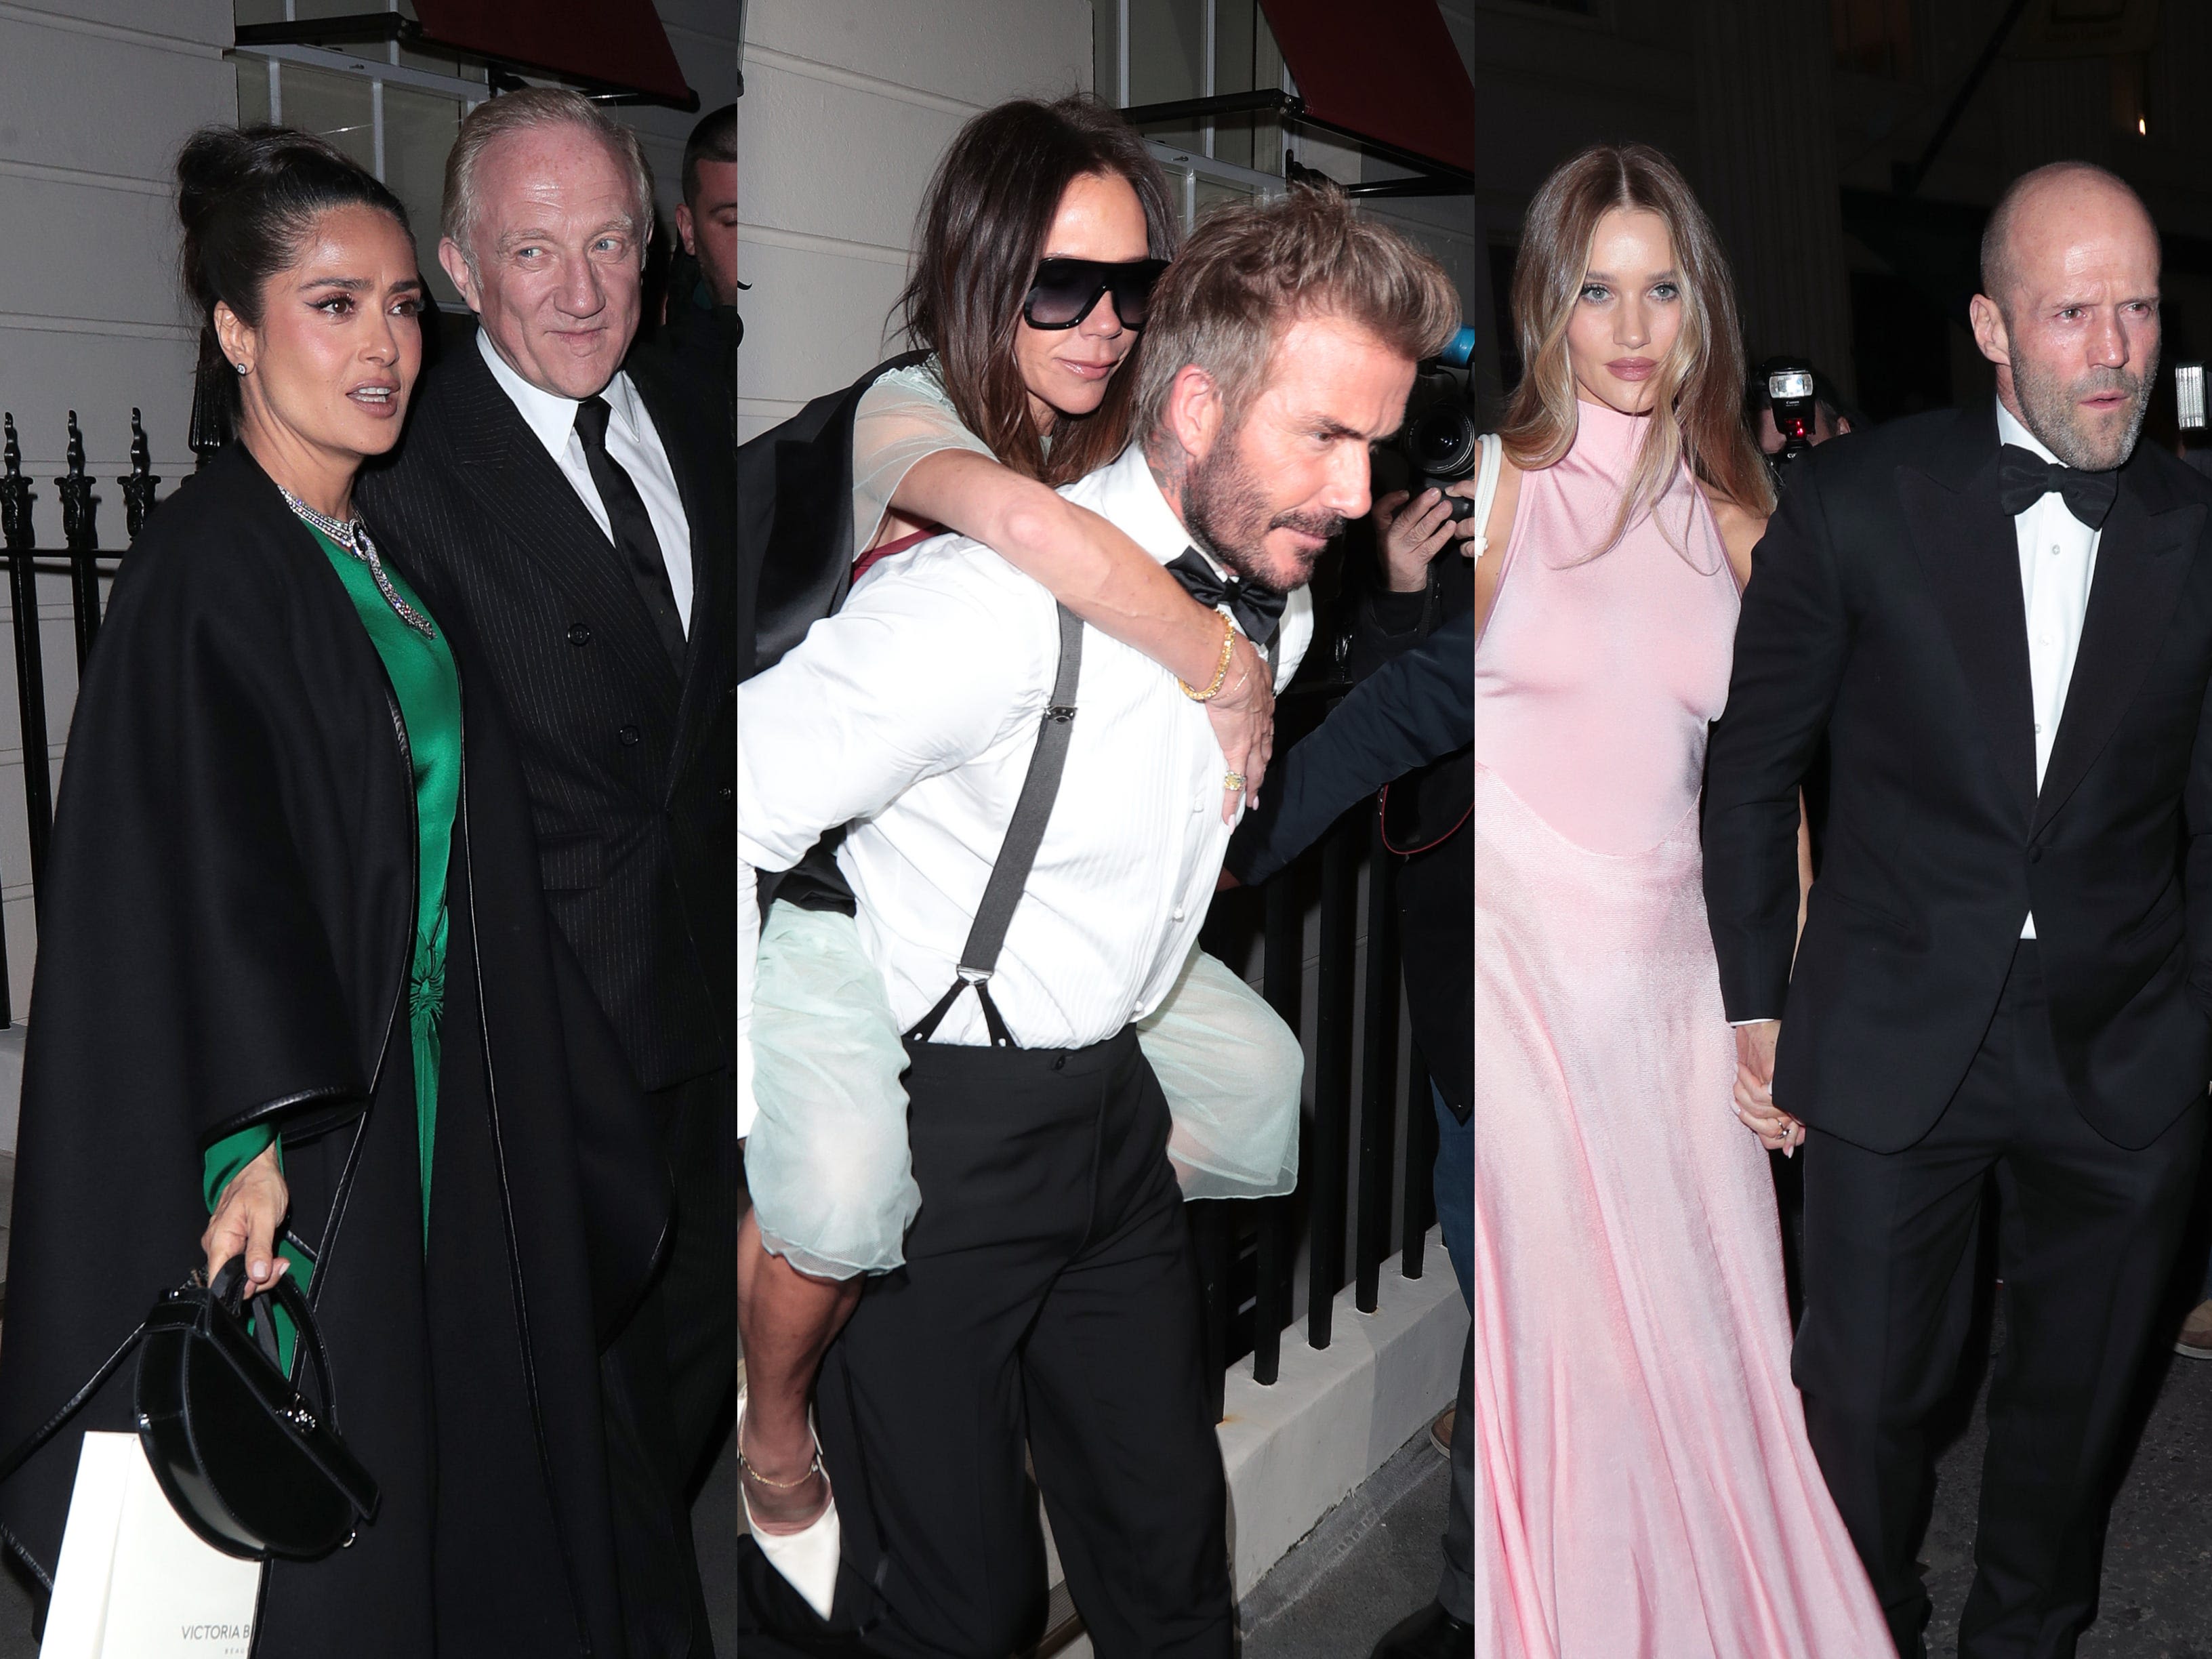 David Beckham gave Victoria Beckham a piggyback ride while leaving her 50th birthday party. Here's the star-studded guest list